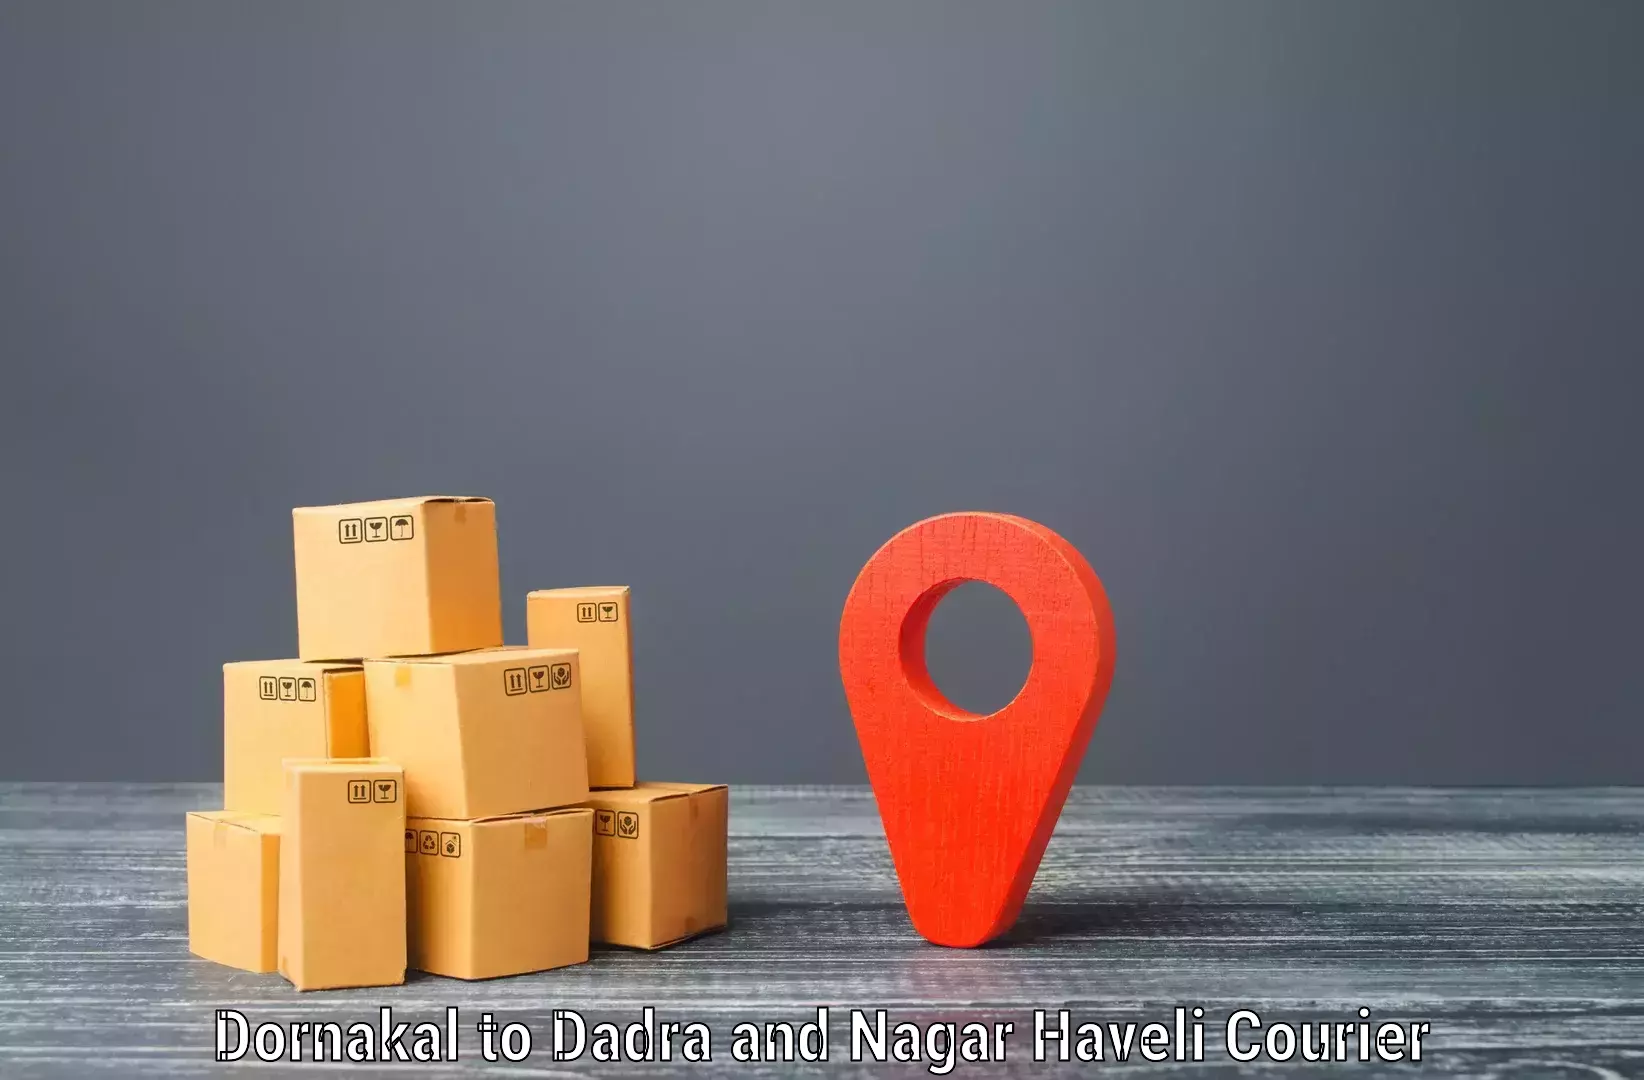 Rapid freight solutions Dornakal to Dadra and Nagar Haveli